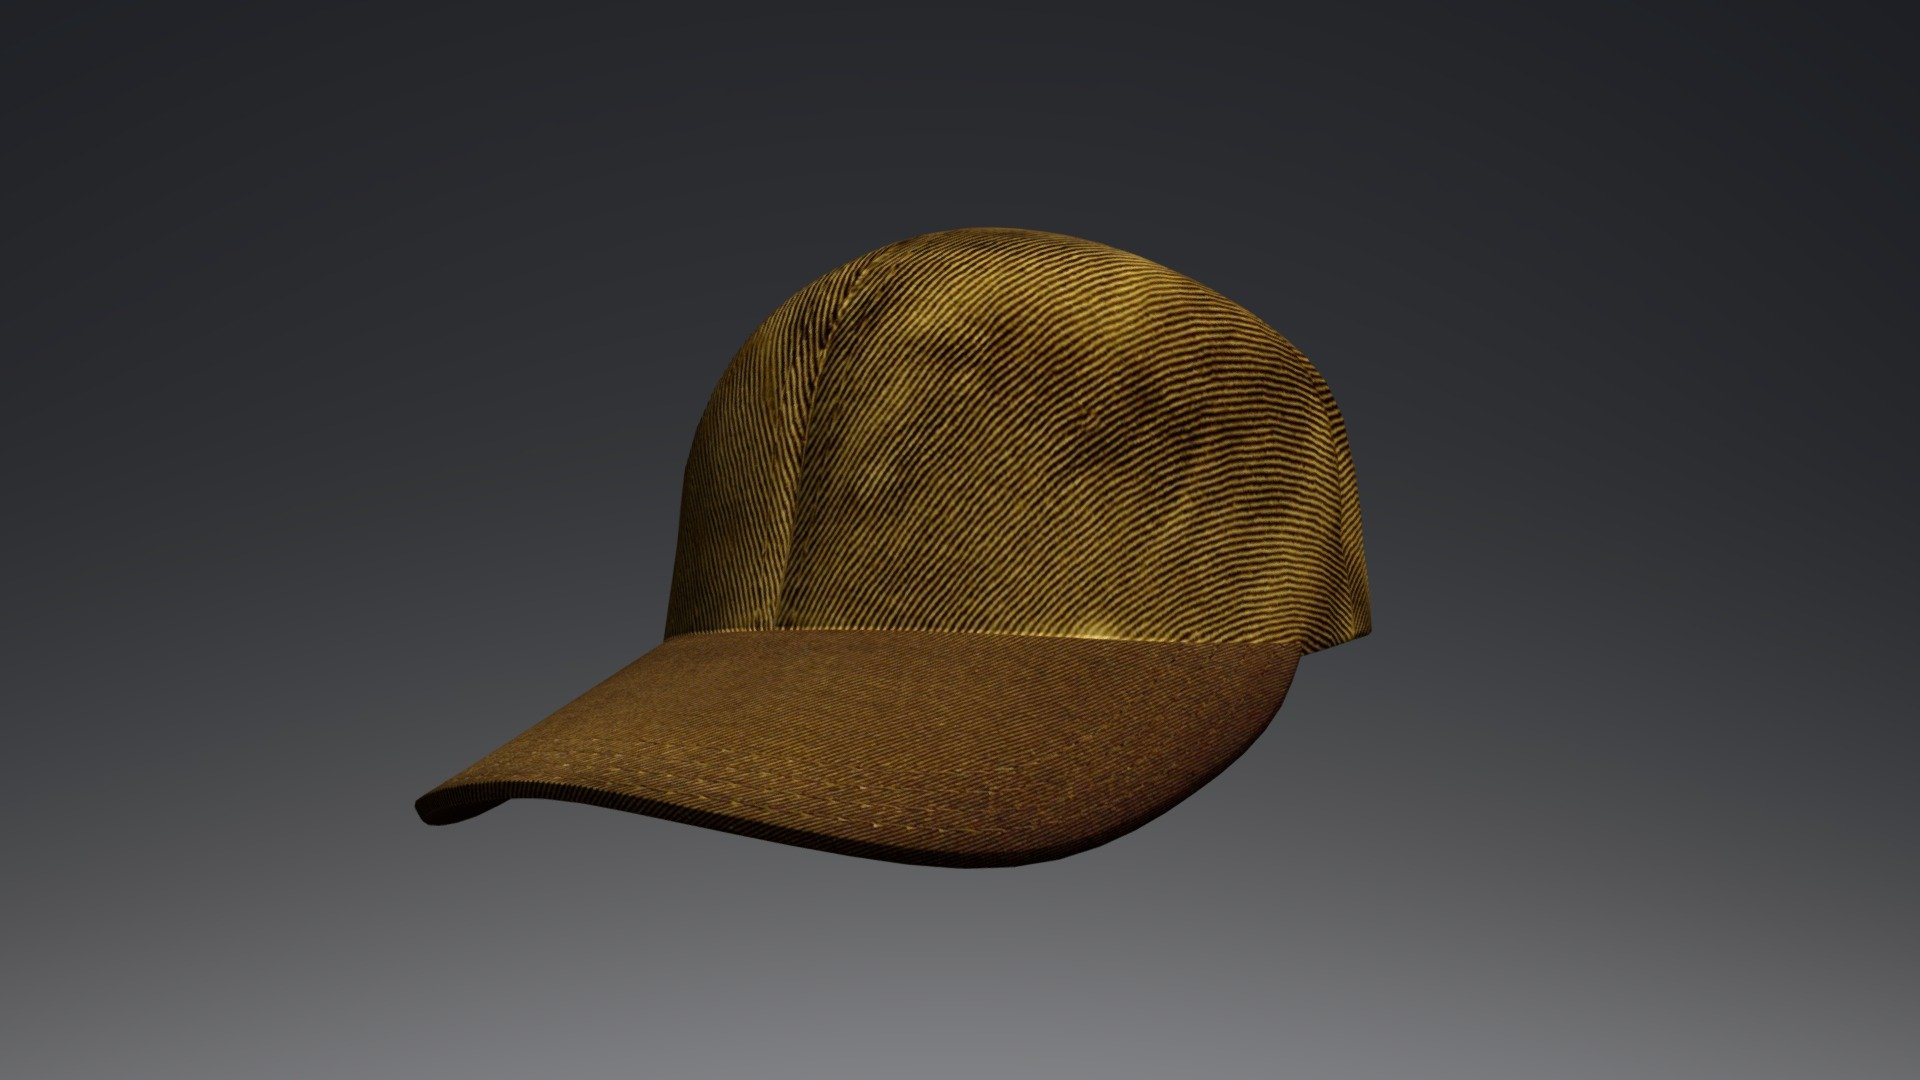 A baseball cap is a type of soft cap with a rounded crown and a stiff bill projecting in front. The front of the cap typically displays a design or a logo (historically, usually only a sports team, namely a baseball team, or names of relevant companies, when used as a commercial marketing technique). The cap may be &ldquo;fitted